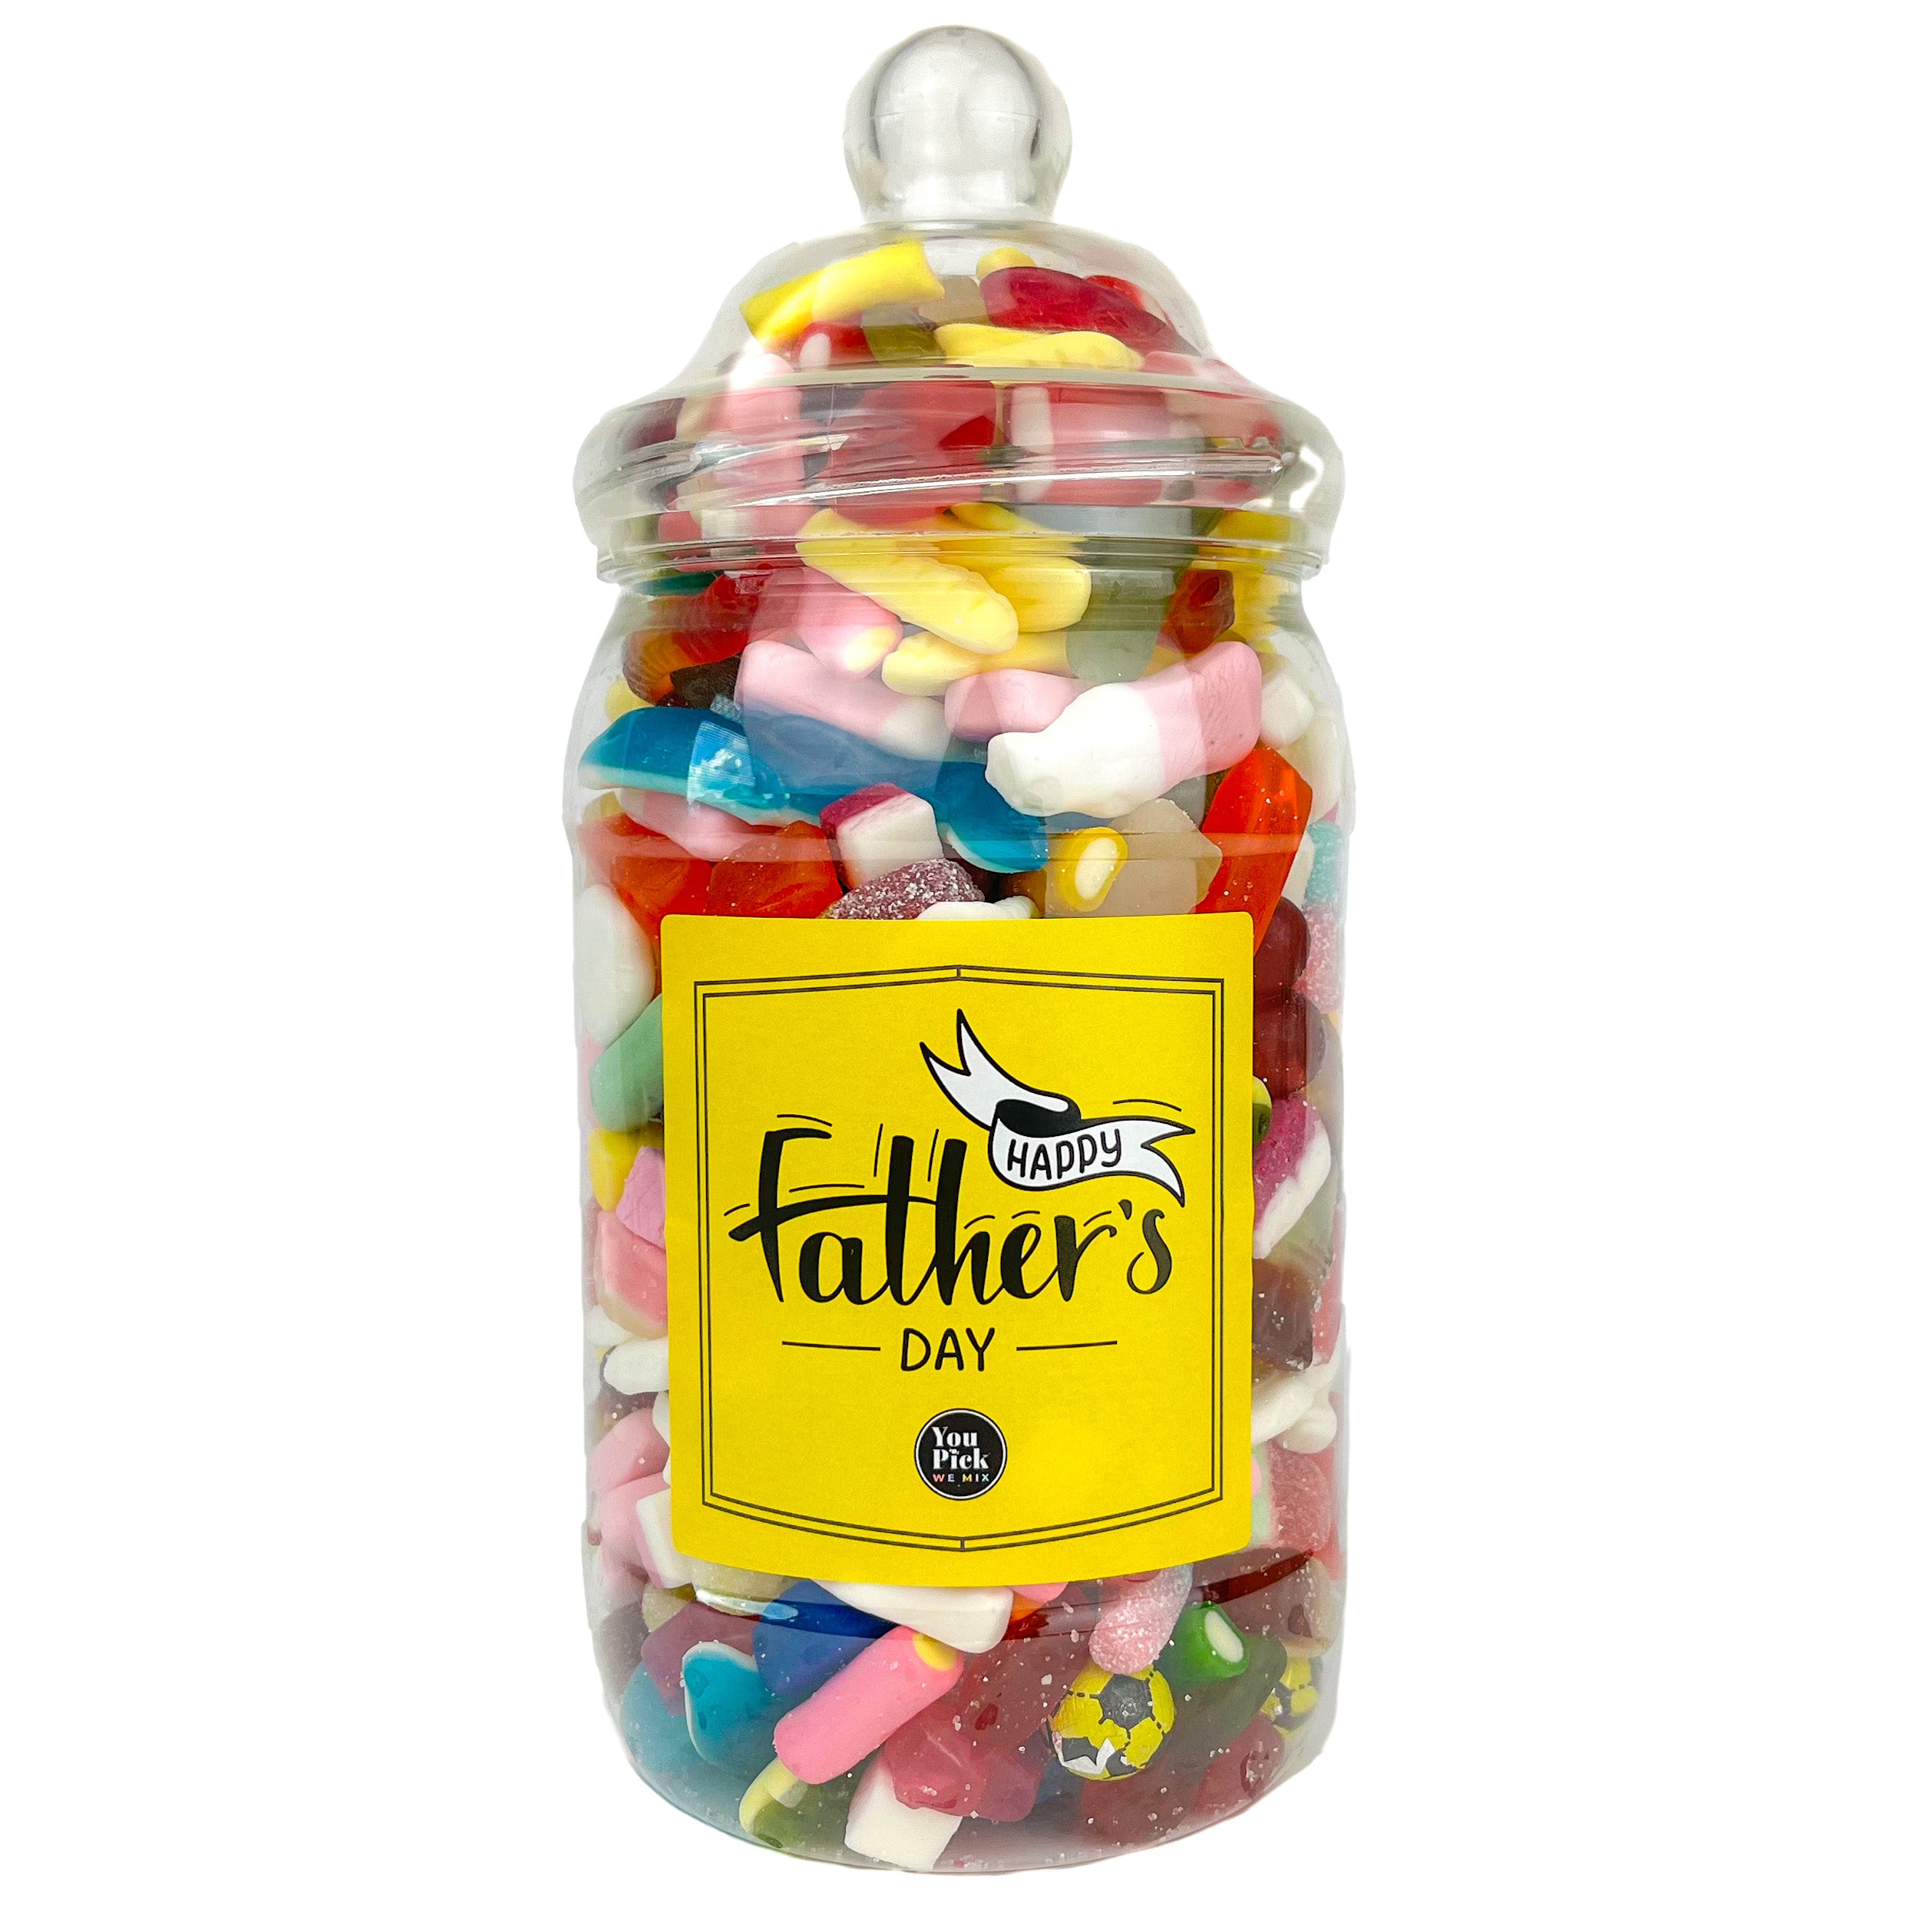 Father's Day Large Jar